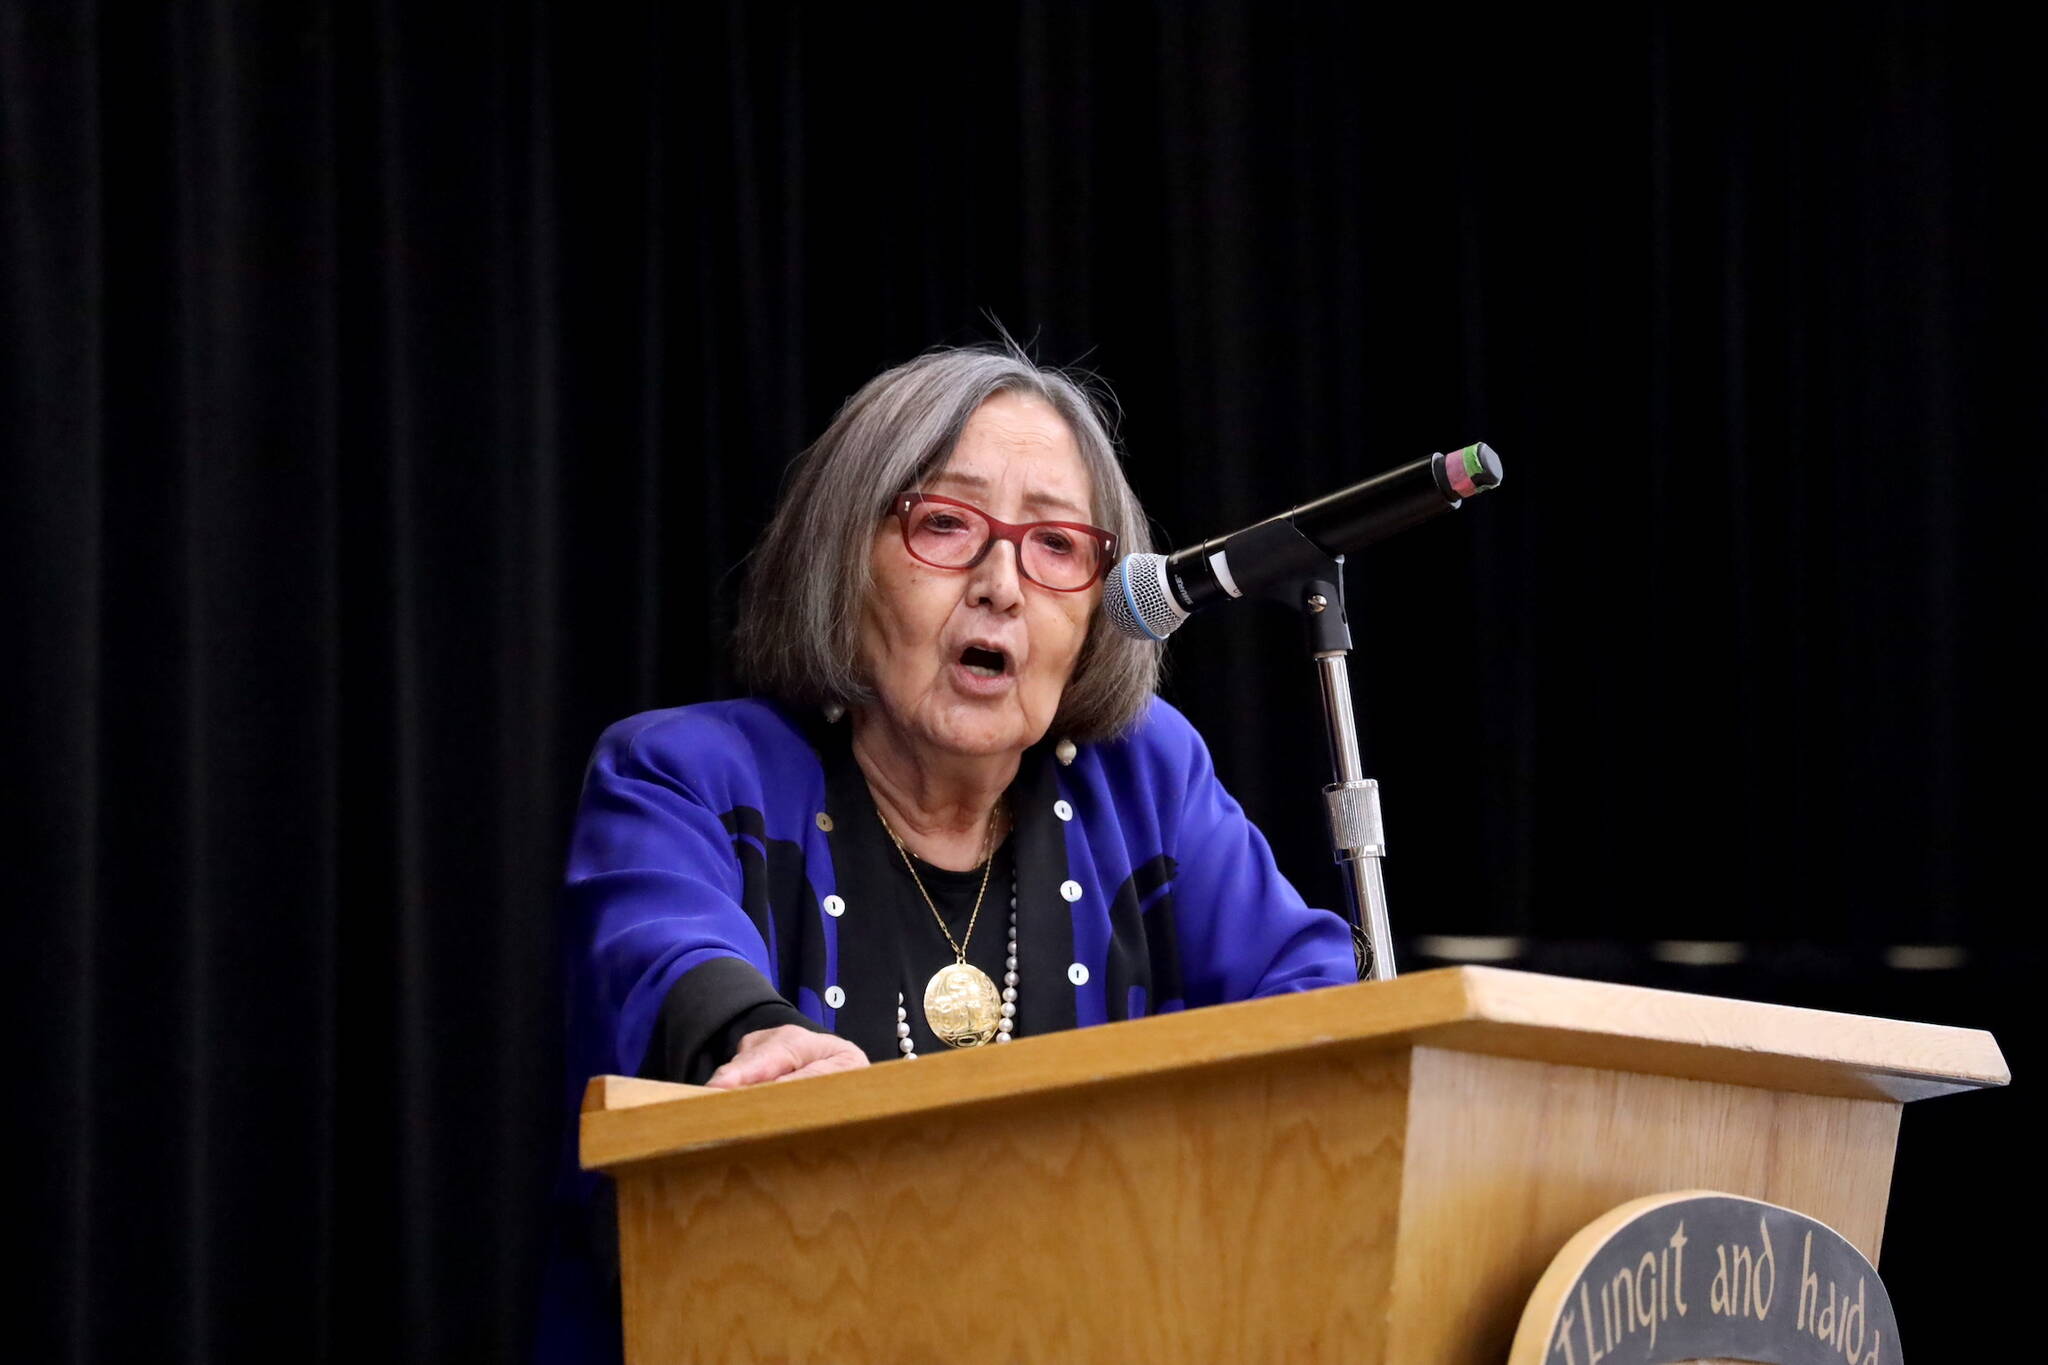 Sealaska Heritage President Rosita Worl speaks to the crowd on stage during a healing event on Indigenous Peoples’ Day on Monday to acknowledge and accept an apology of the closure of Juneau’s Memorial Presbyterian Church in 1962. (Clarise Larson / Juneau Empire)